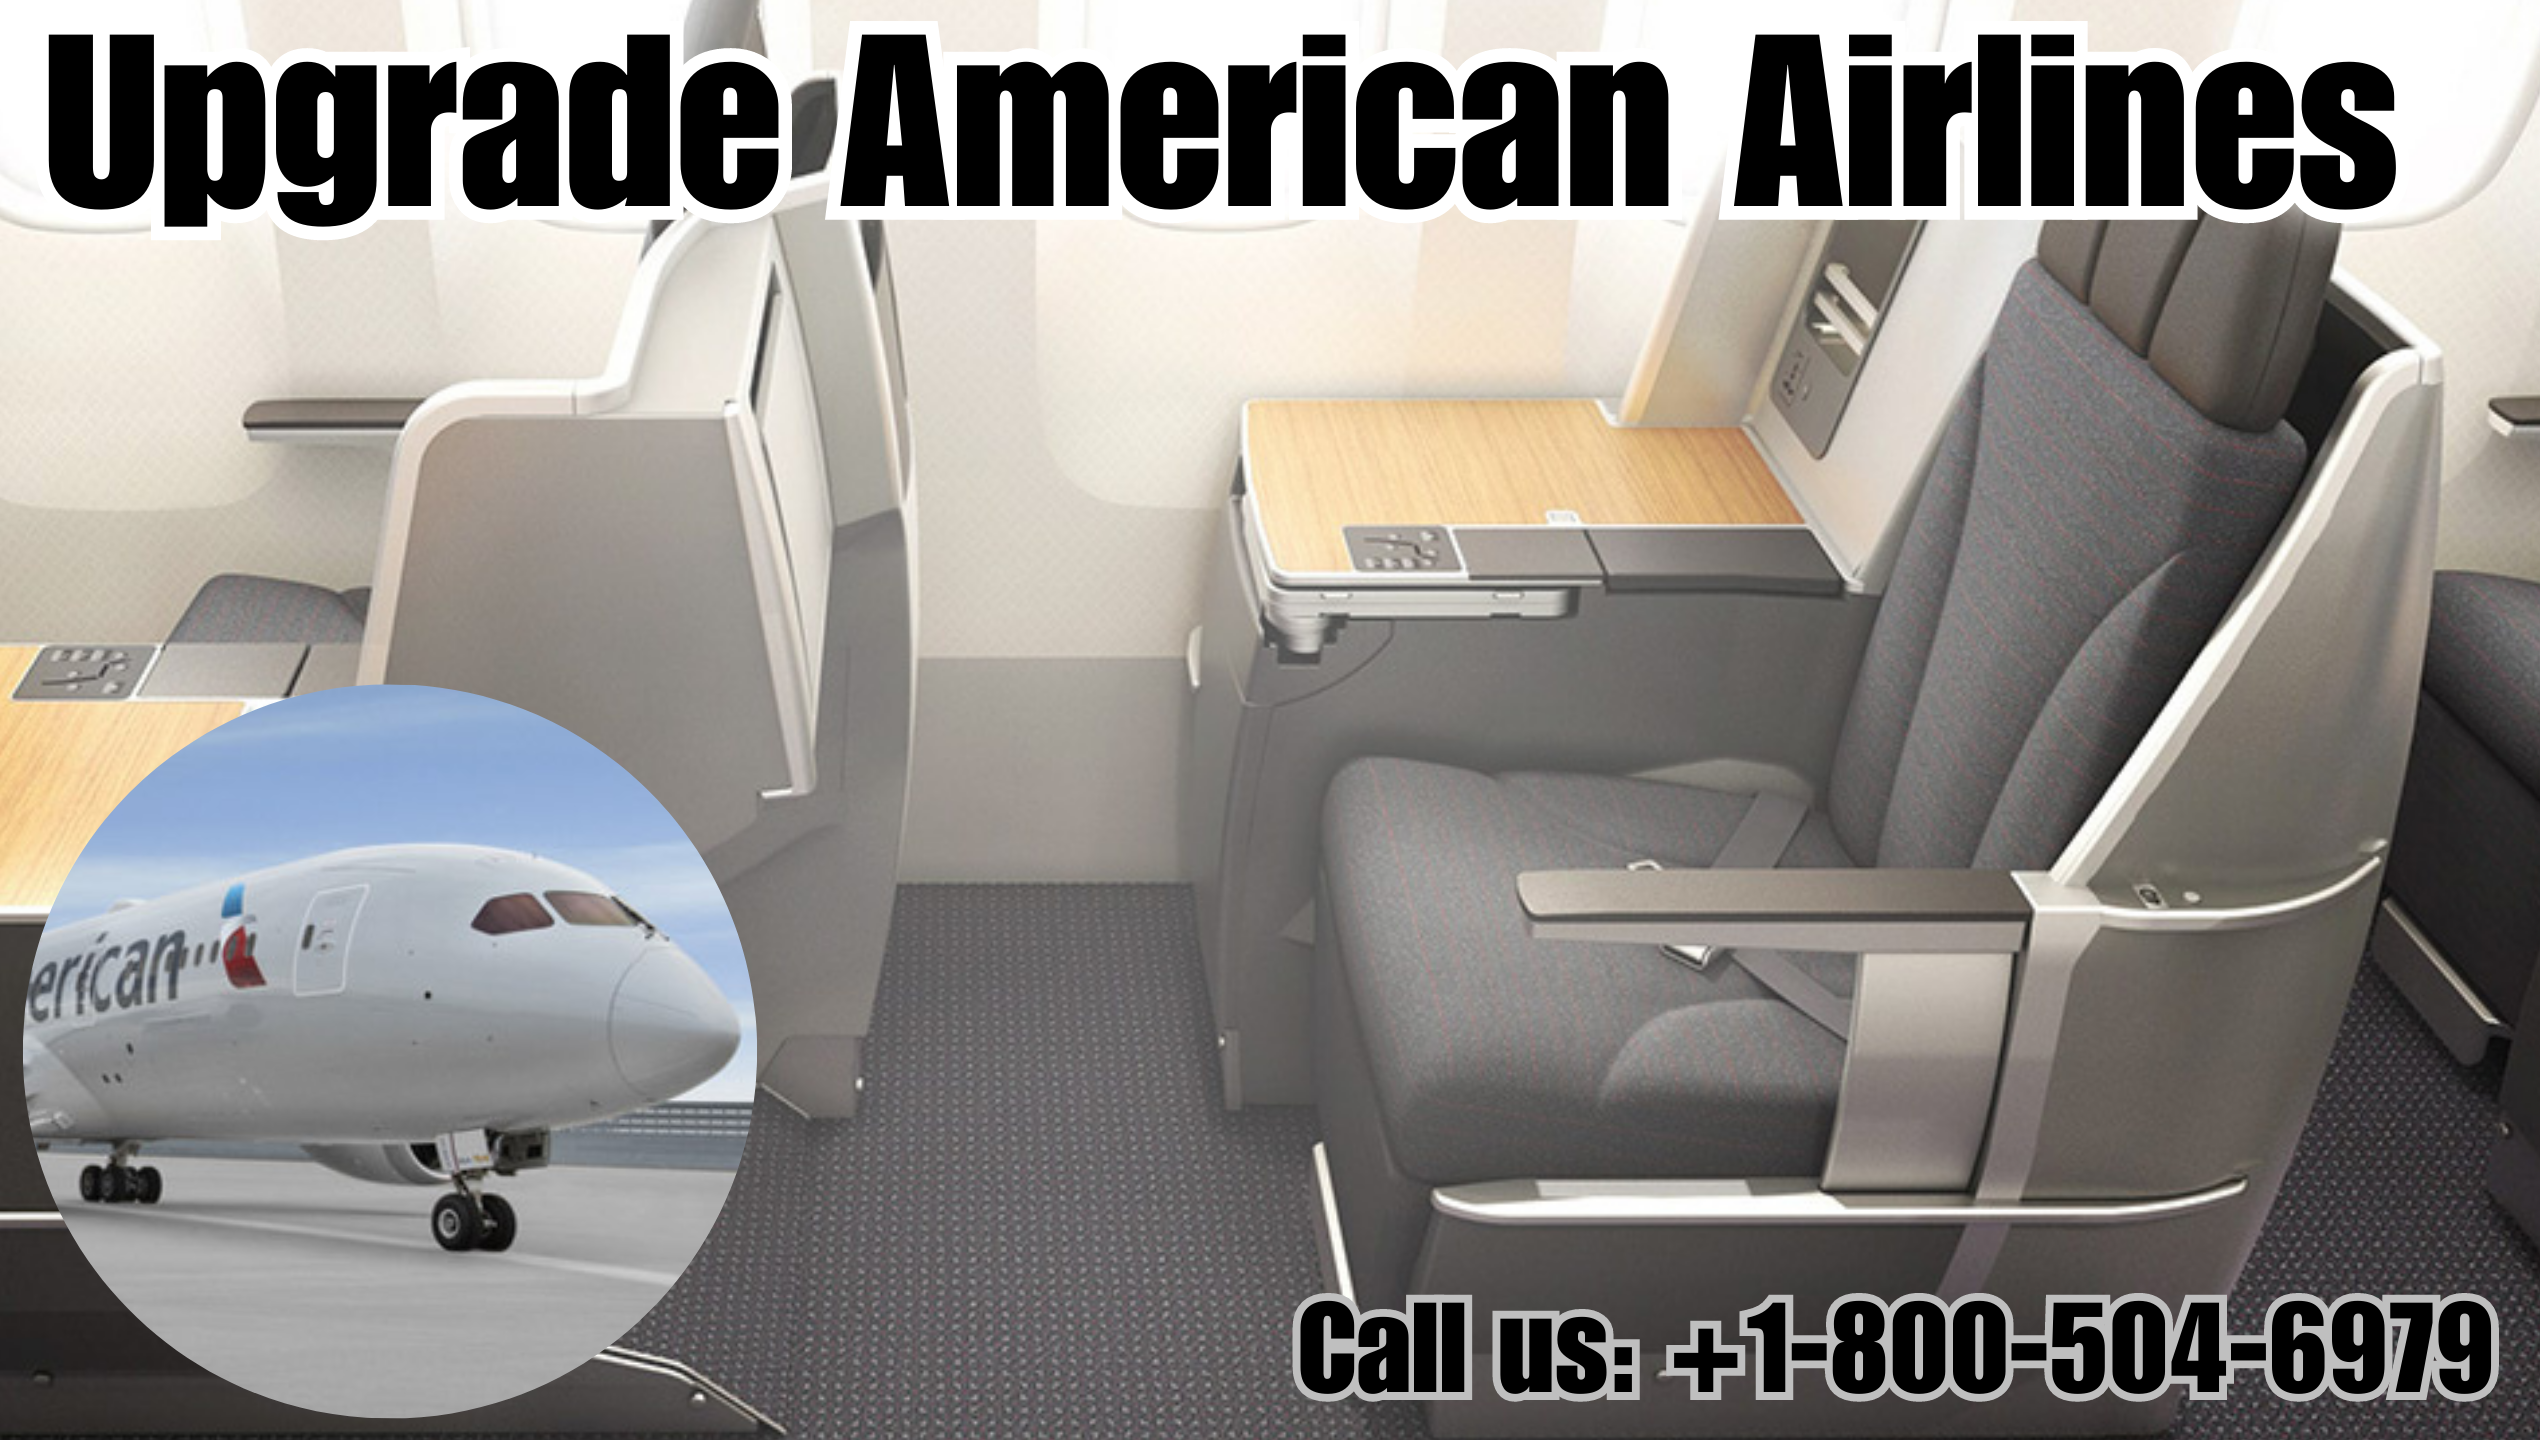 American Airlines upgrade